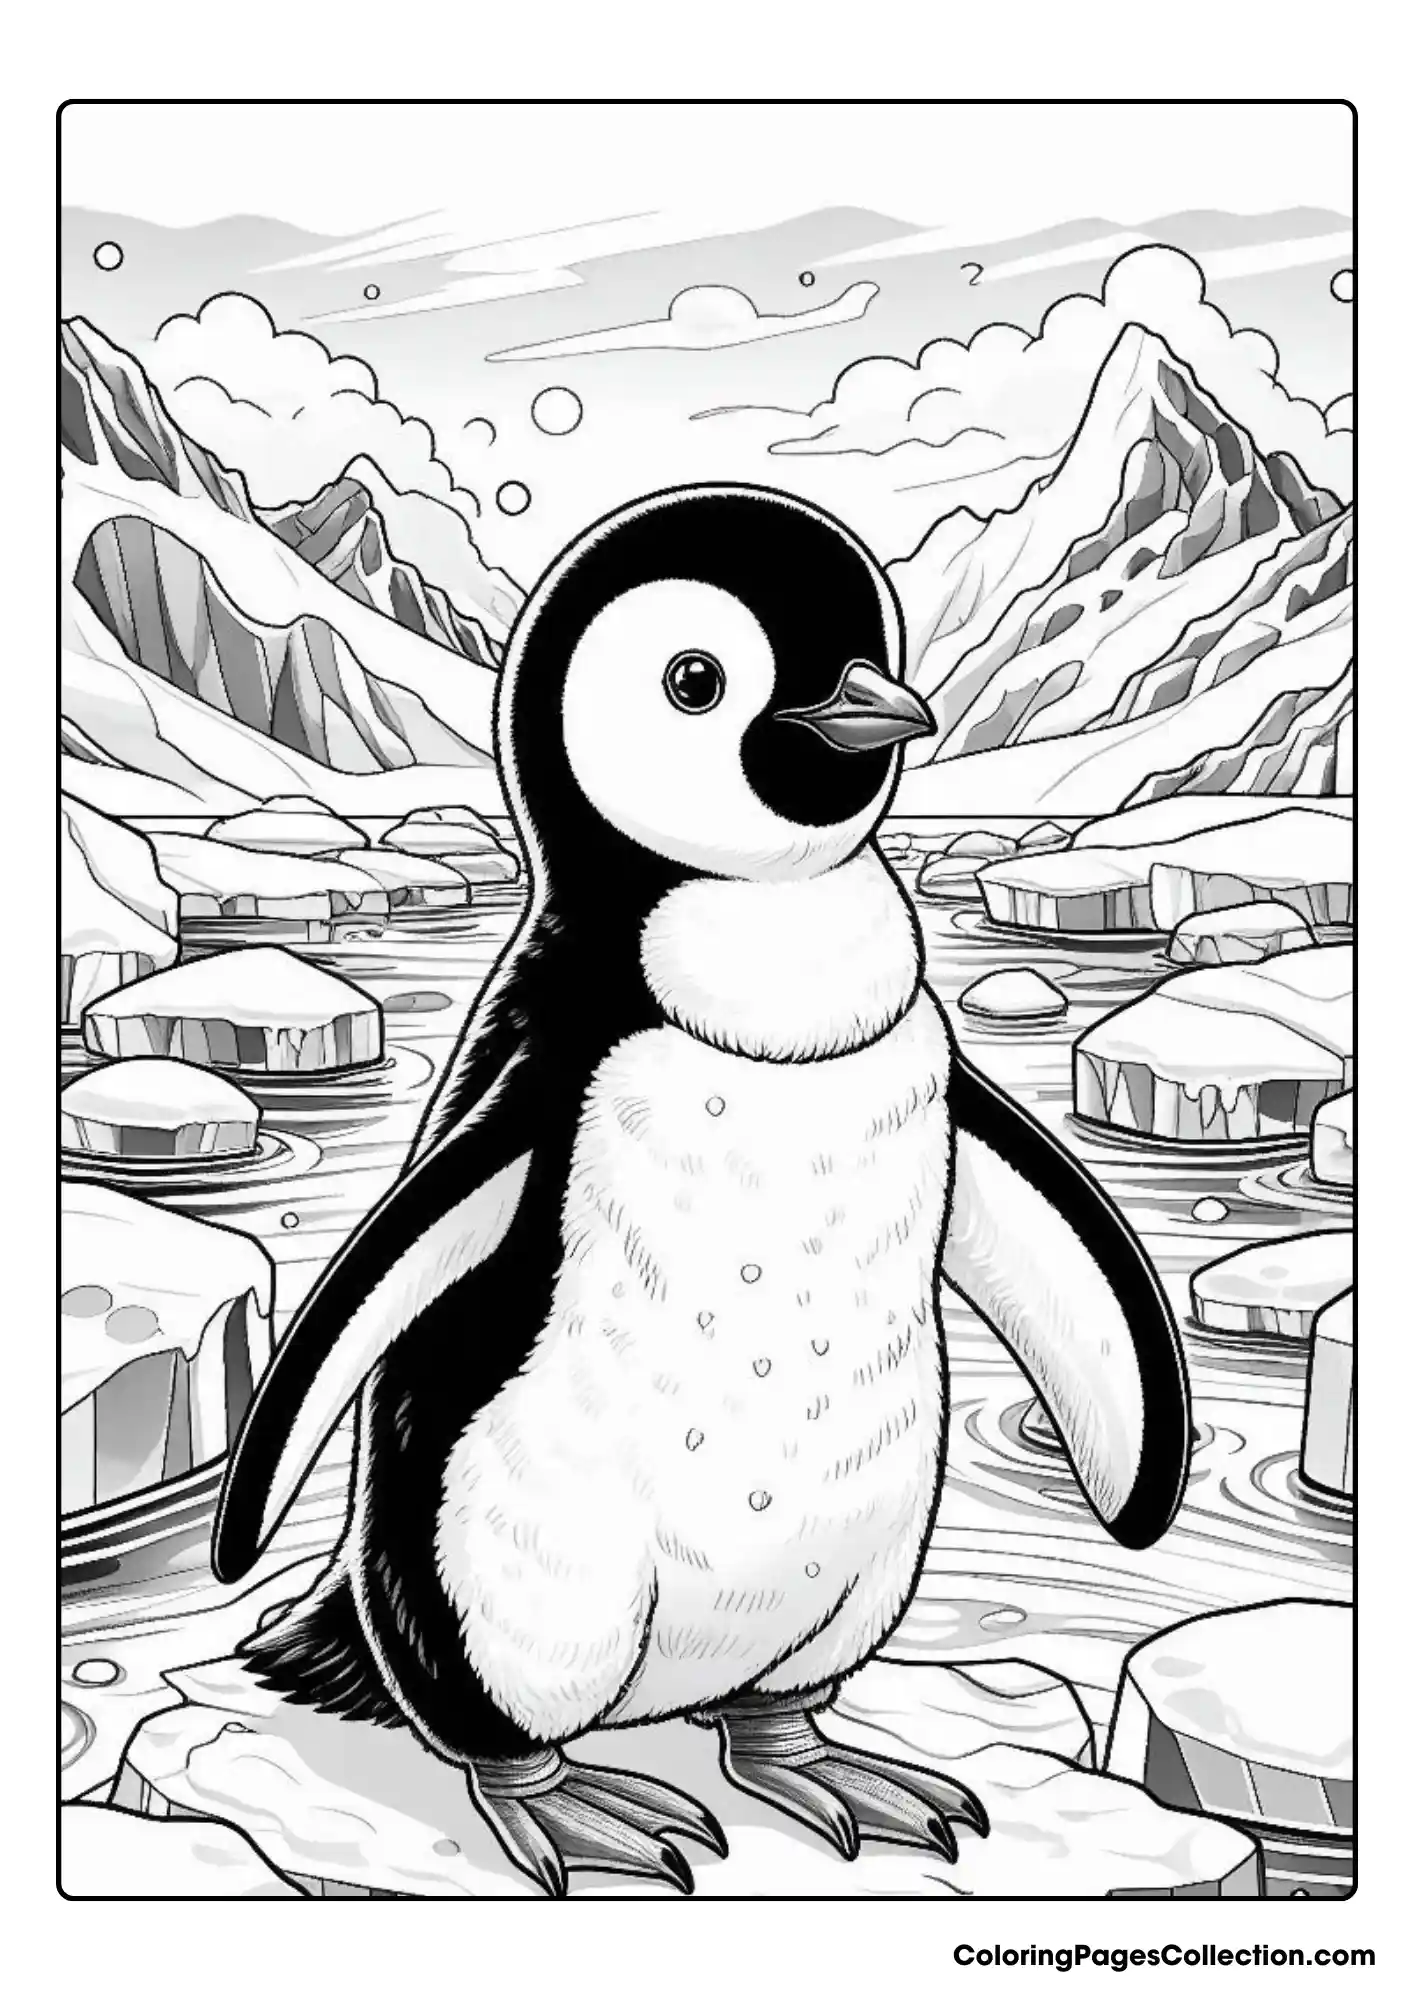 A penguin with ice floes